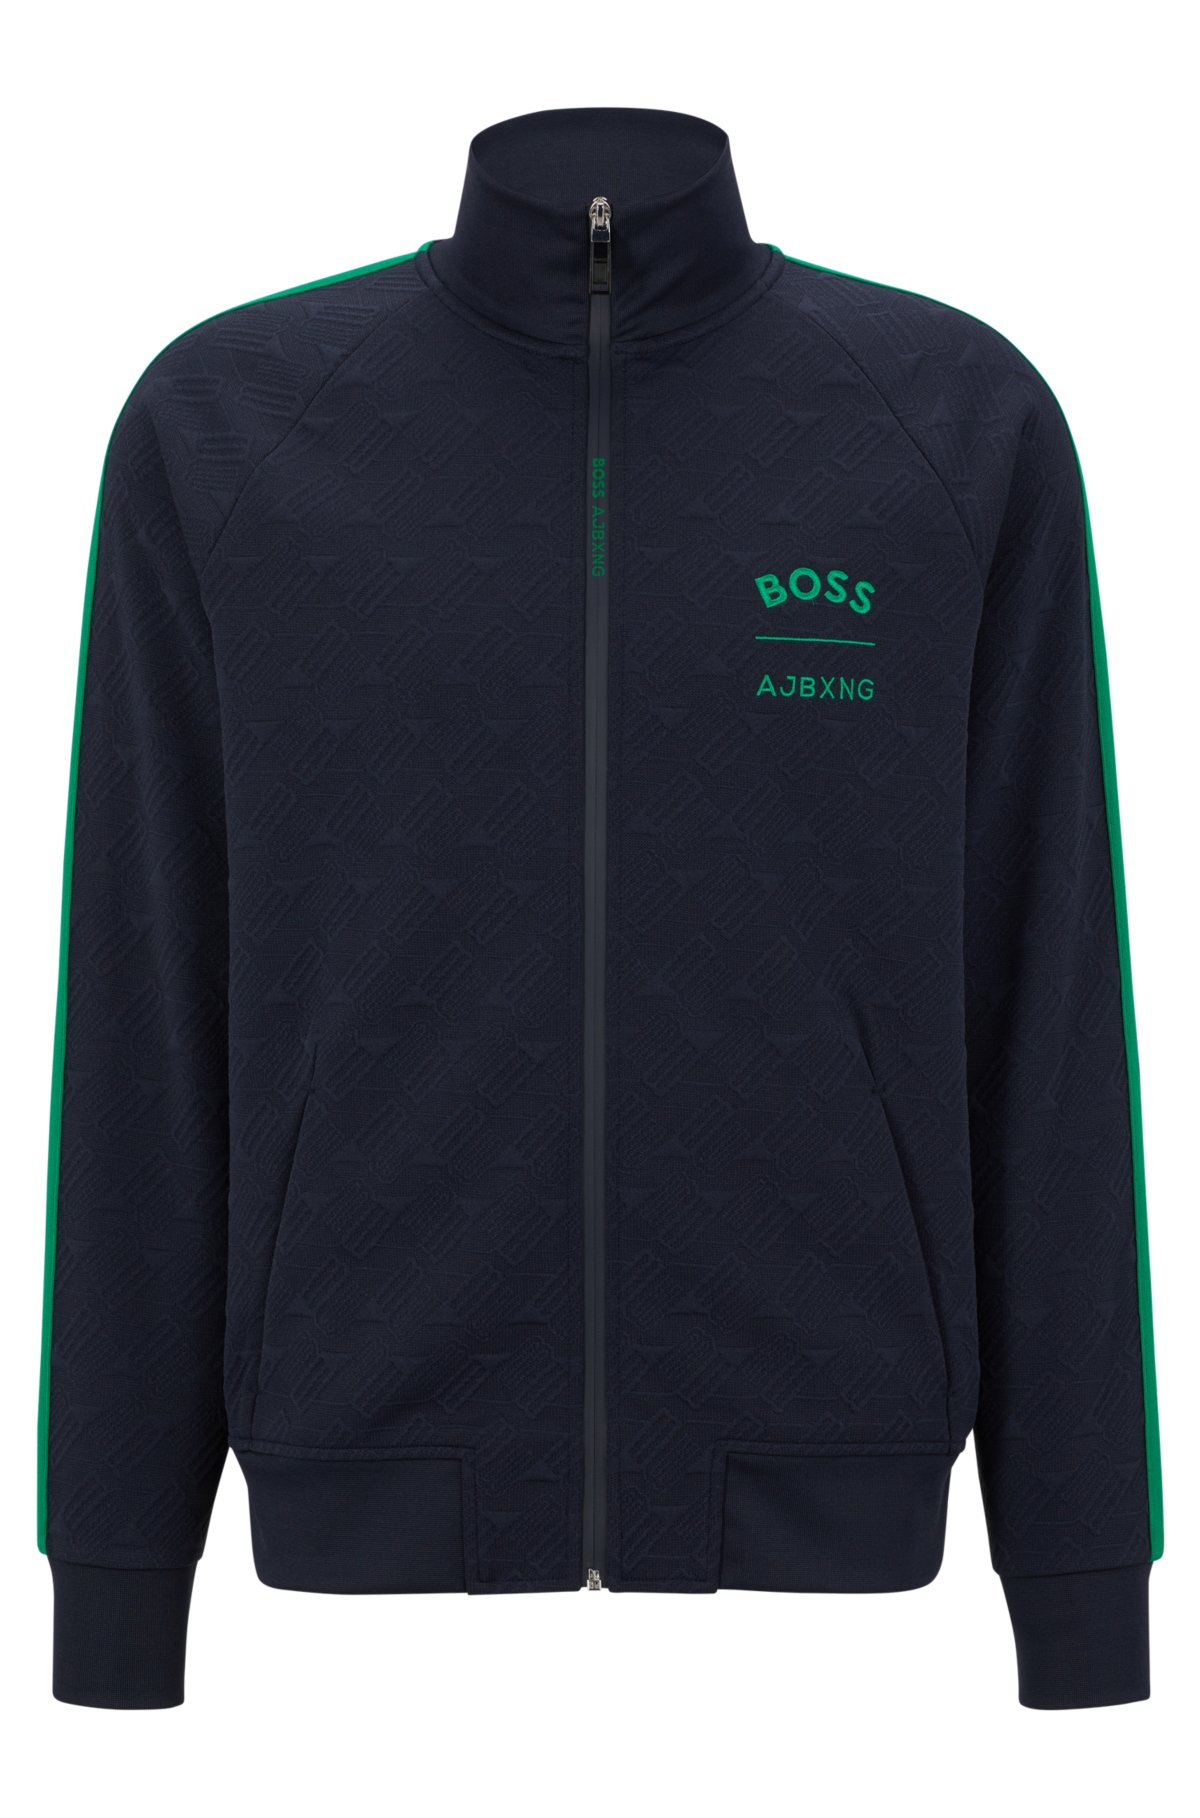 BOSS x AJBXNG relaxed-fit zip-up sweatshirt with all-over monograms